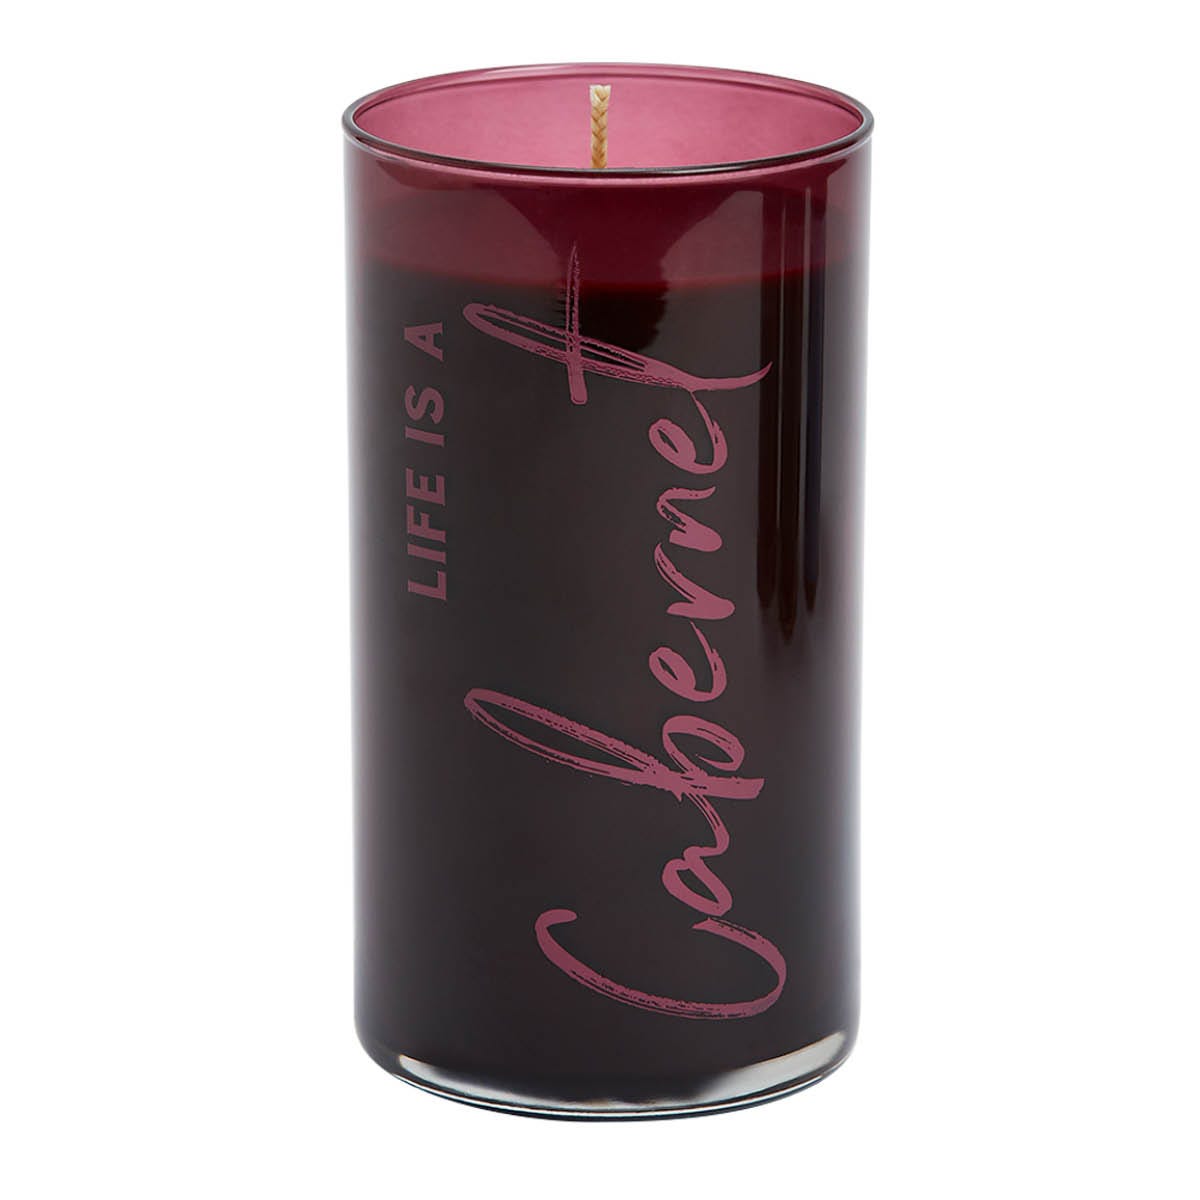 Life is a Cabernet - Dark Plum and Red Berries Scented Jar Candle